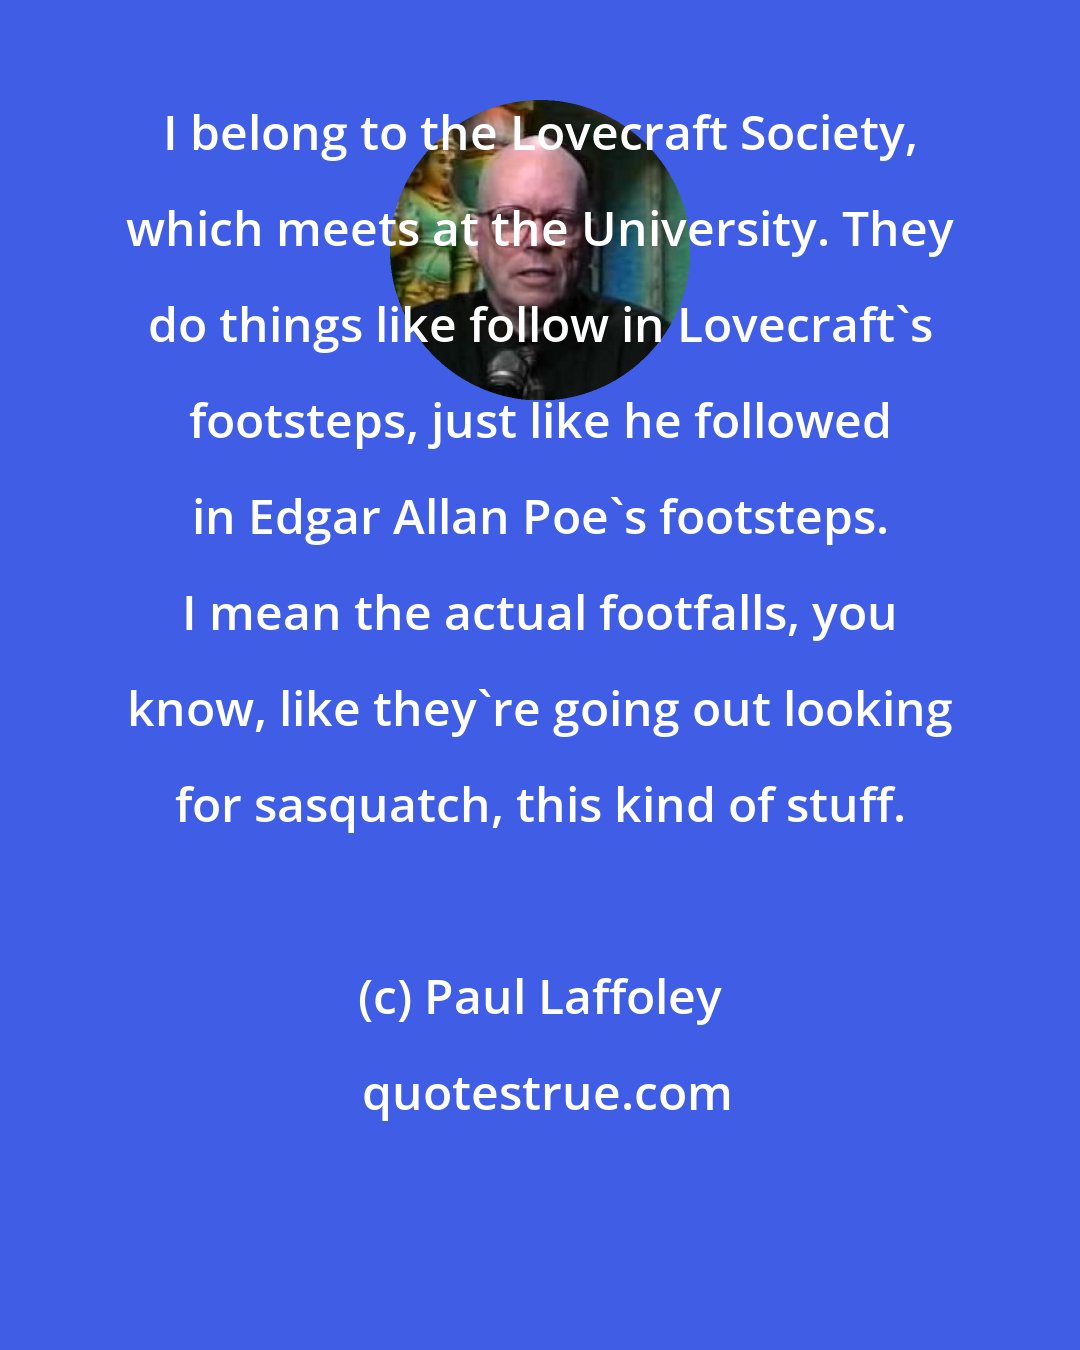 Paul Laffoley: I belong to the Lovecraft Society, which meets at the University. They do things like follow in Lovecraft's footsteps, just like he followed in Edgar Allan Poe's footsteps. I mean the actual footfalls, you know, like they're going out looking for sasquatch, this kind of stuff.